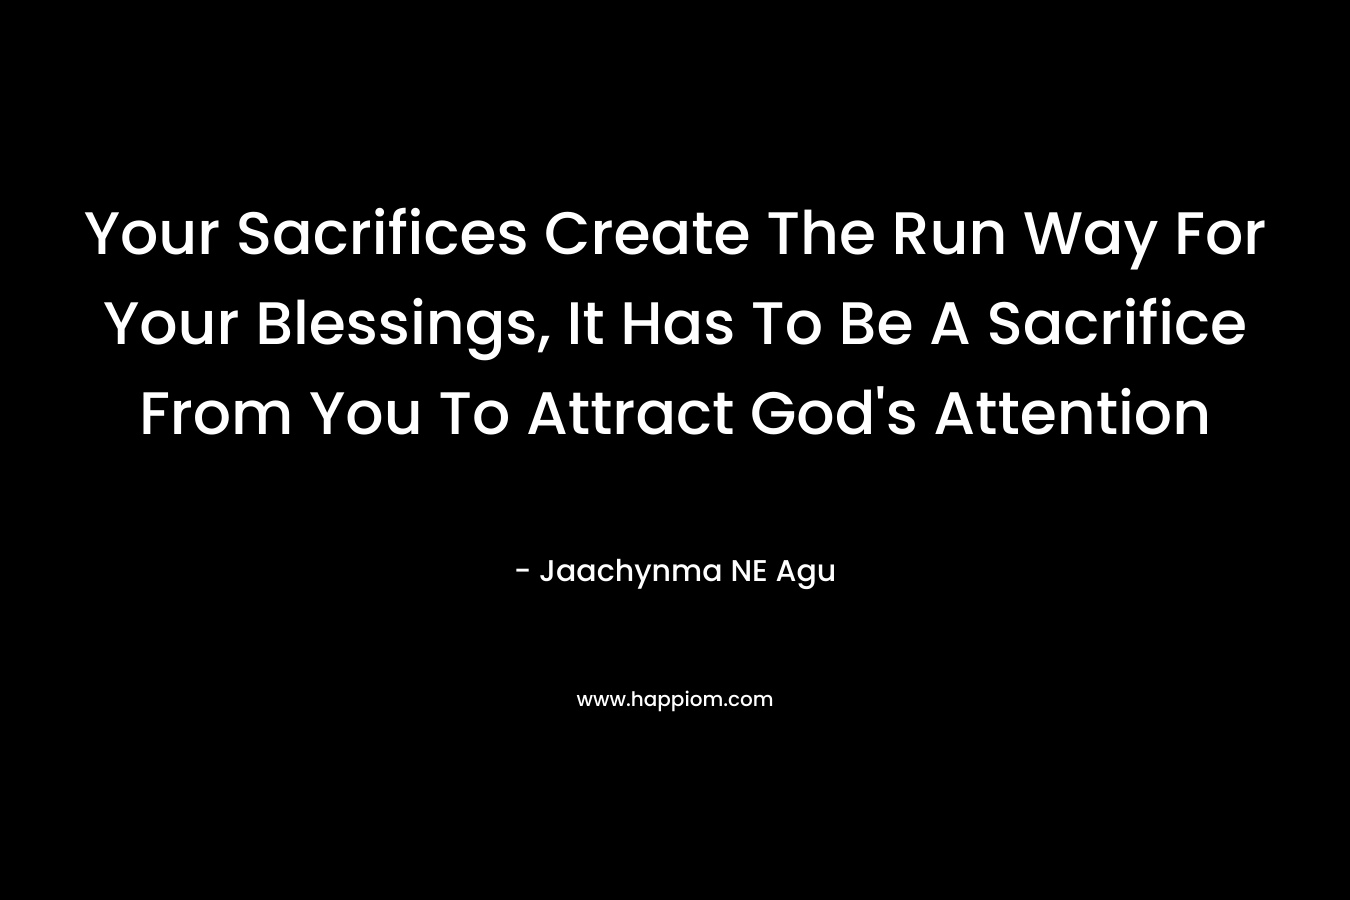 Your Sacrifices Create The Run Way For Your Blessings, It Has To Be A Sacrifice From You To Attract God’s Attention – Jaachynma NE Agu